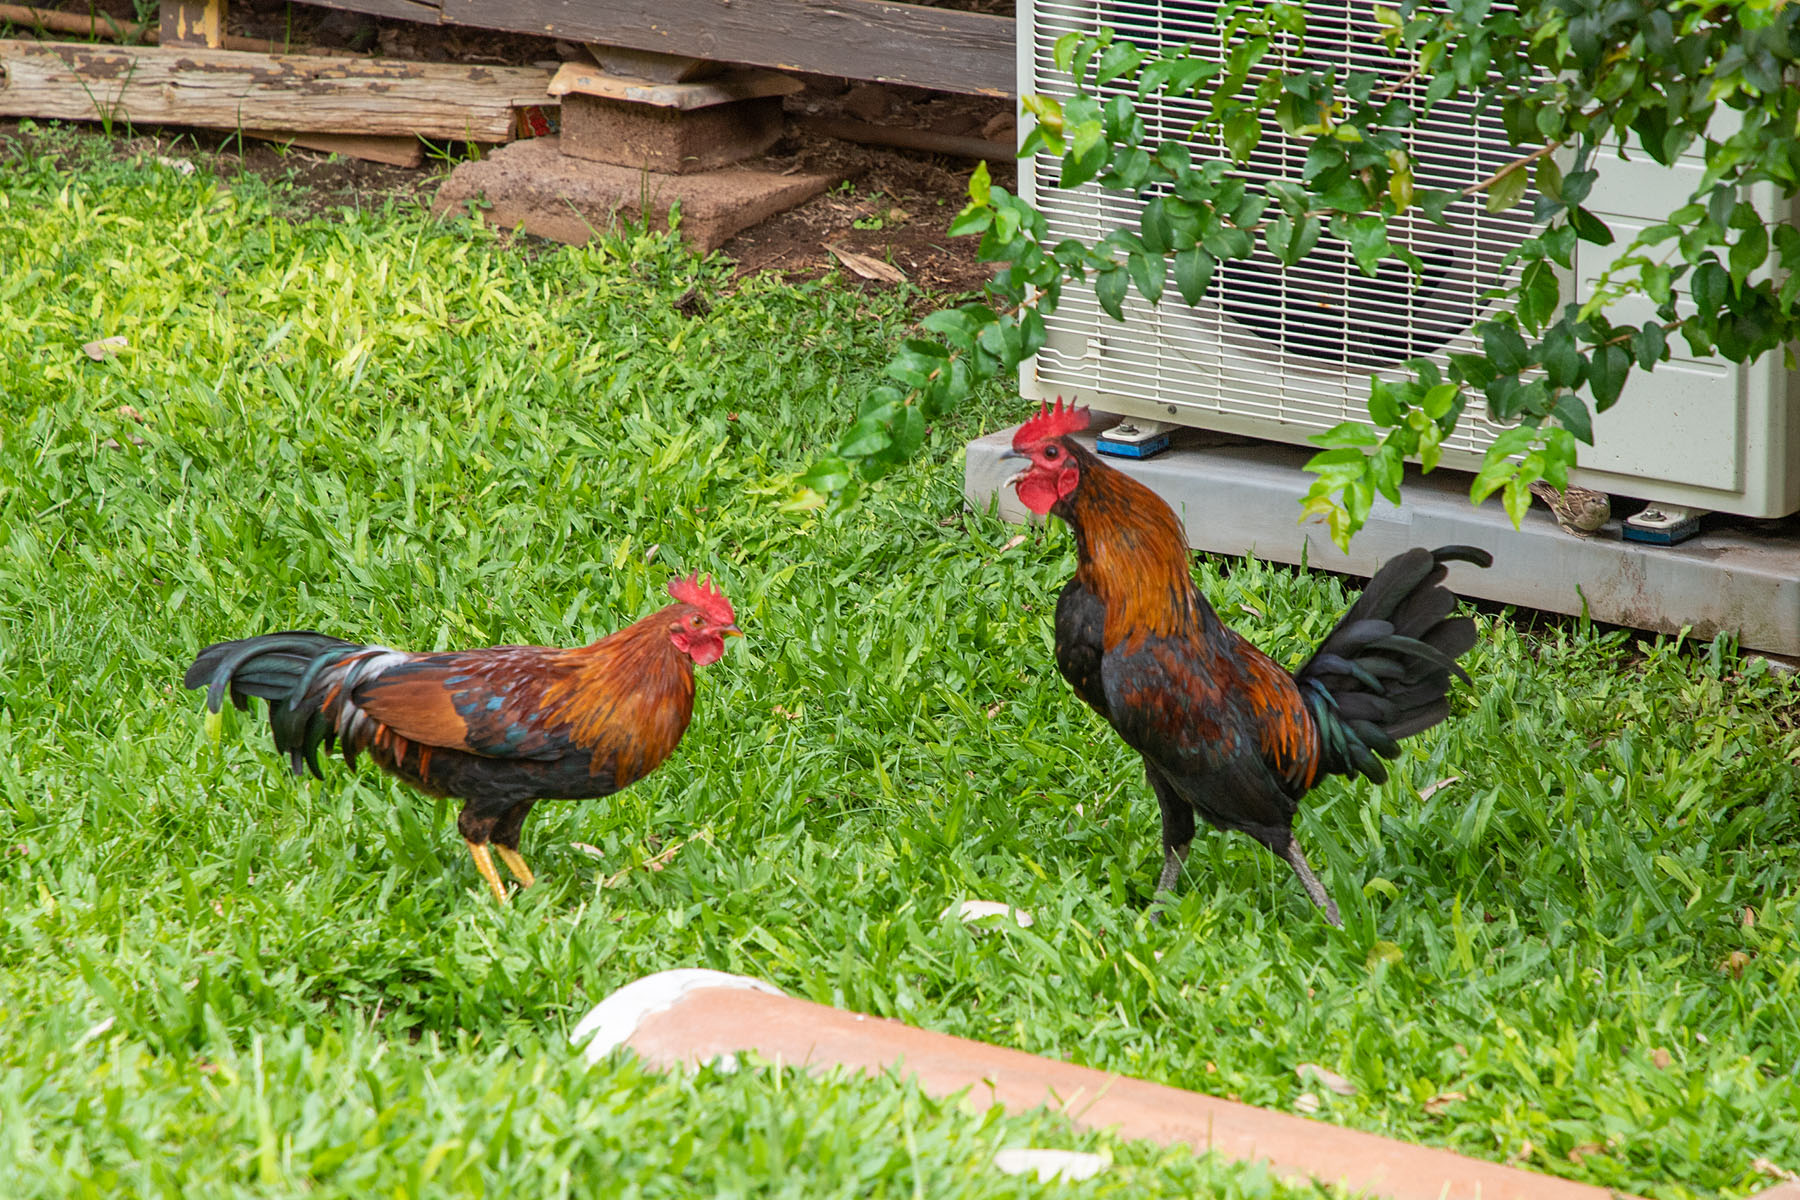 There are chickens running everywhere in Hawaii.  Click for next photo.